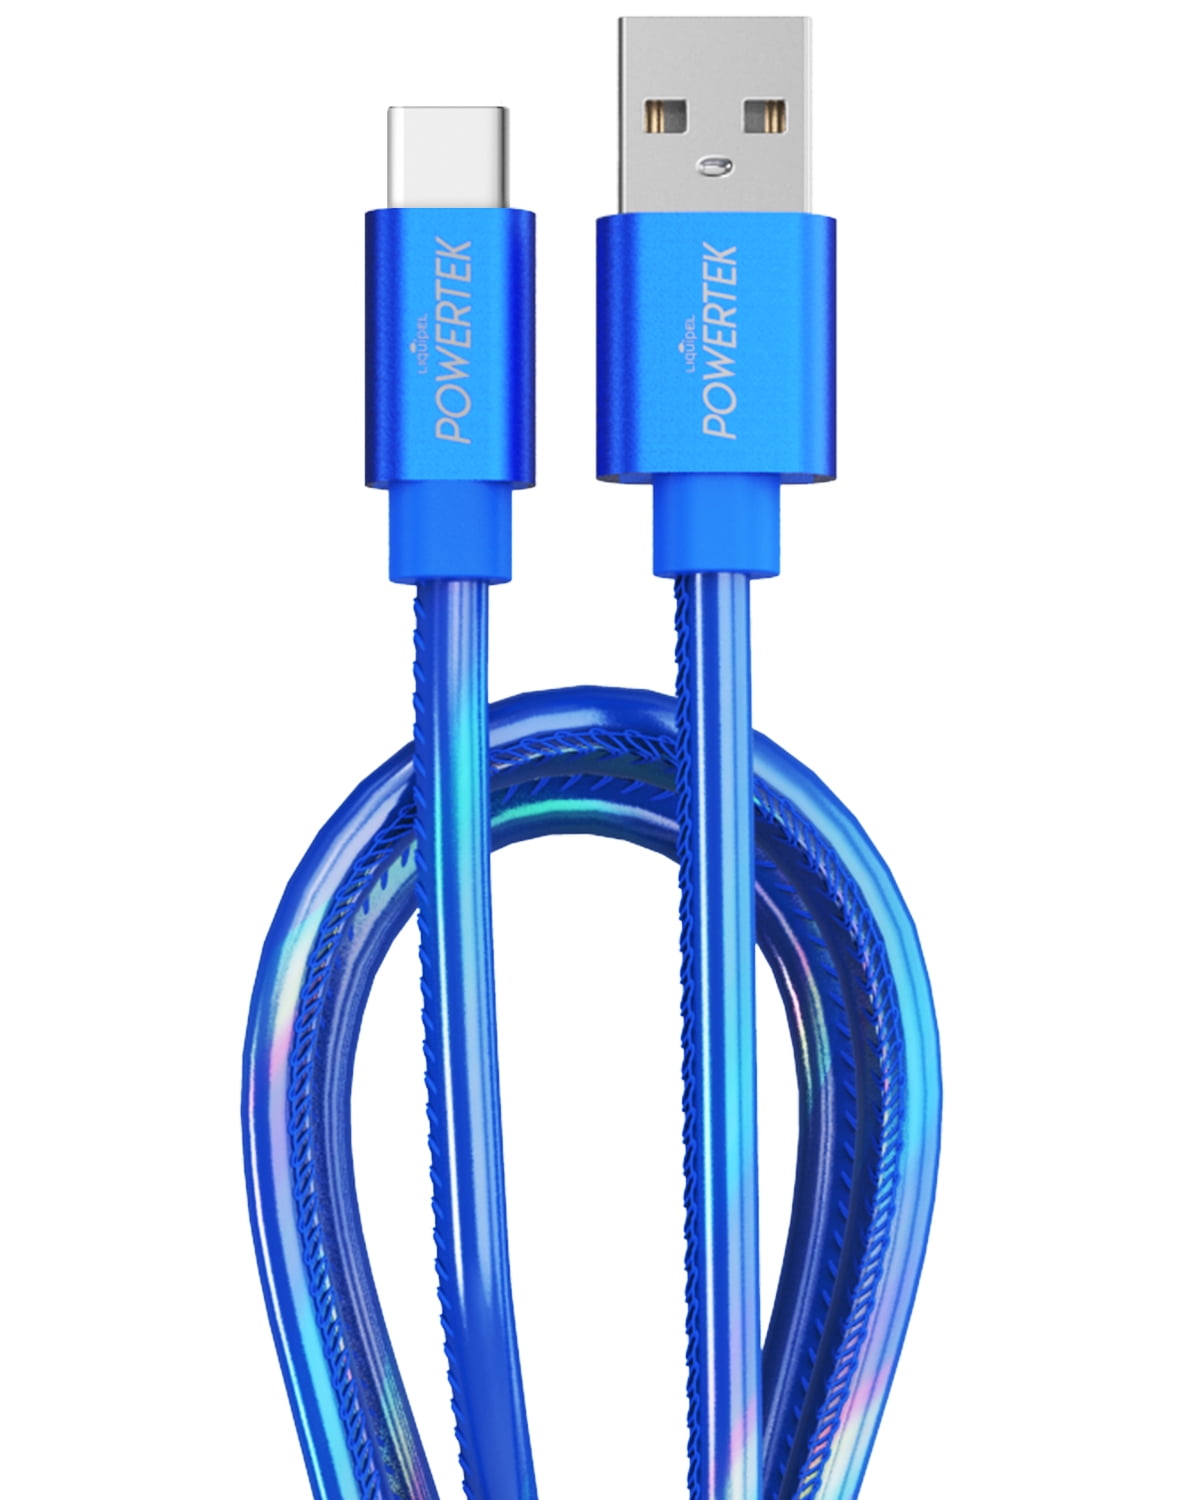 240W USB C Cable Factory - USB C Cable Manufacturer-Wandkey